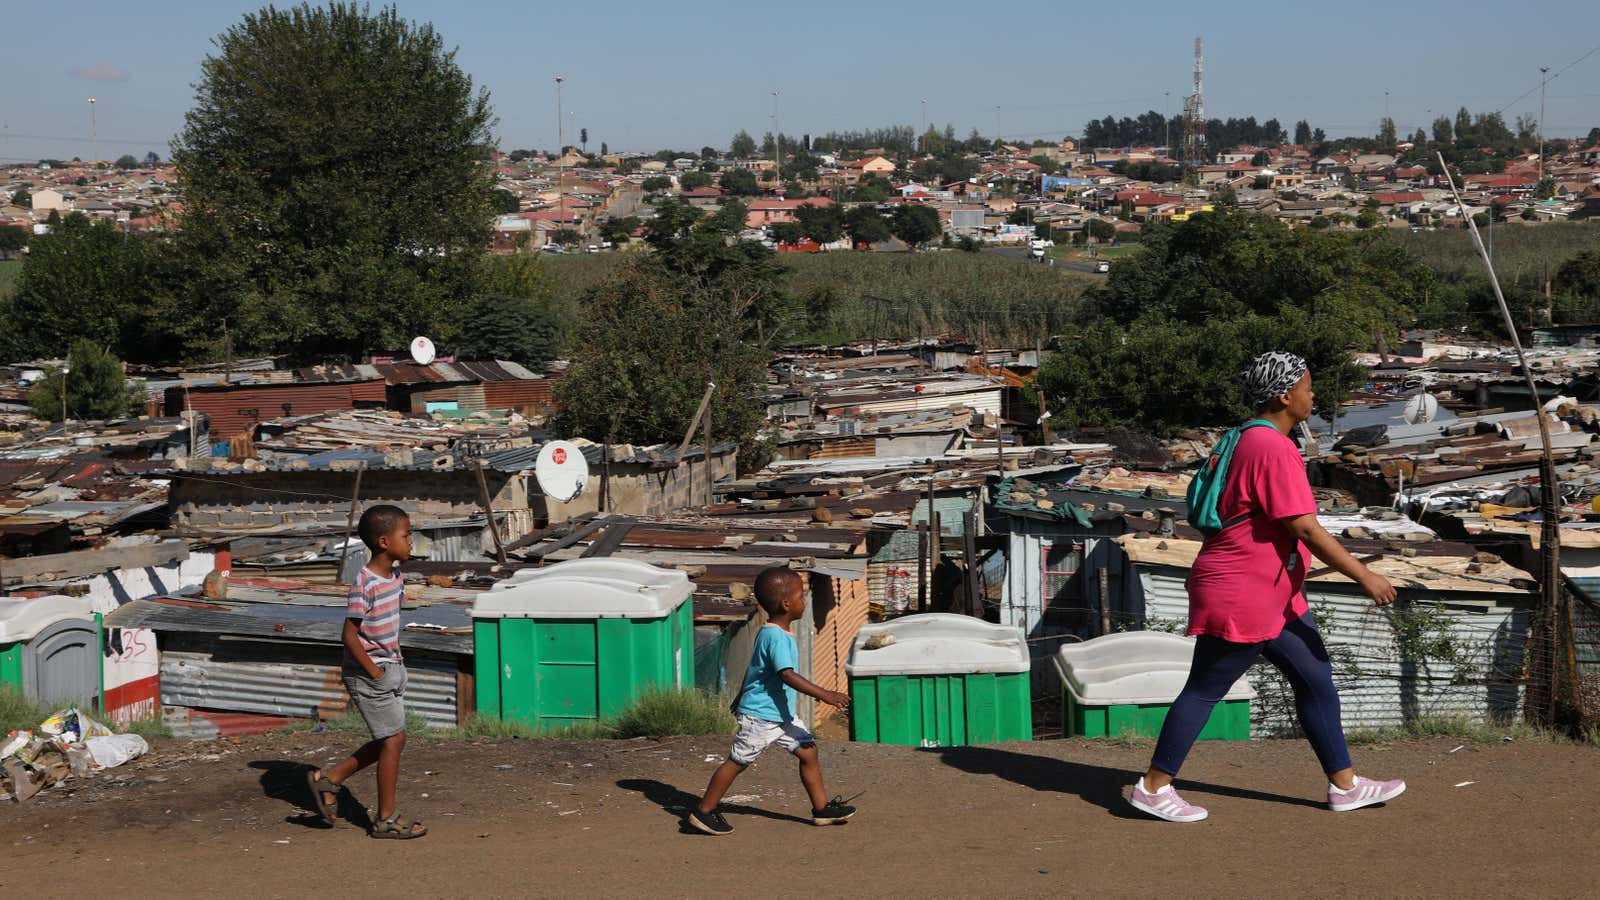 A mother and her children walk past public toilets at an informal settlement in Kliptown, Soweto, South Africa, Mar. 19, 2020.